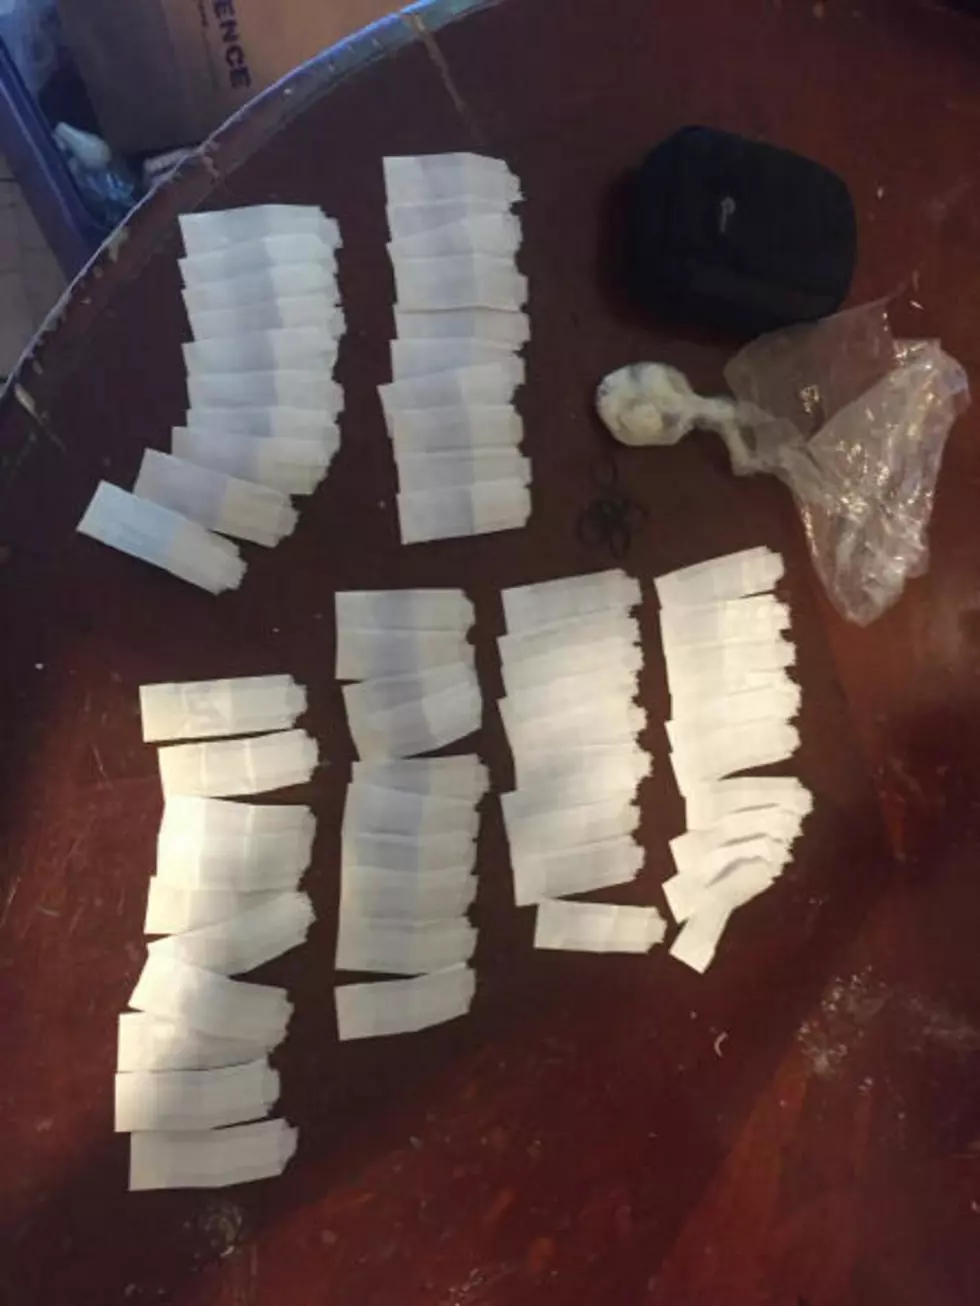 Police Arrest Men With 279 Bags of Heroin